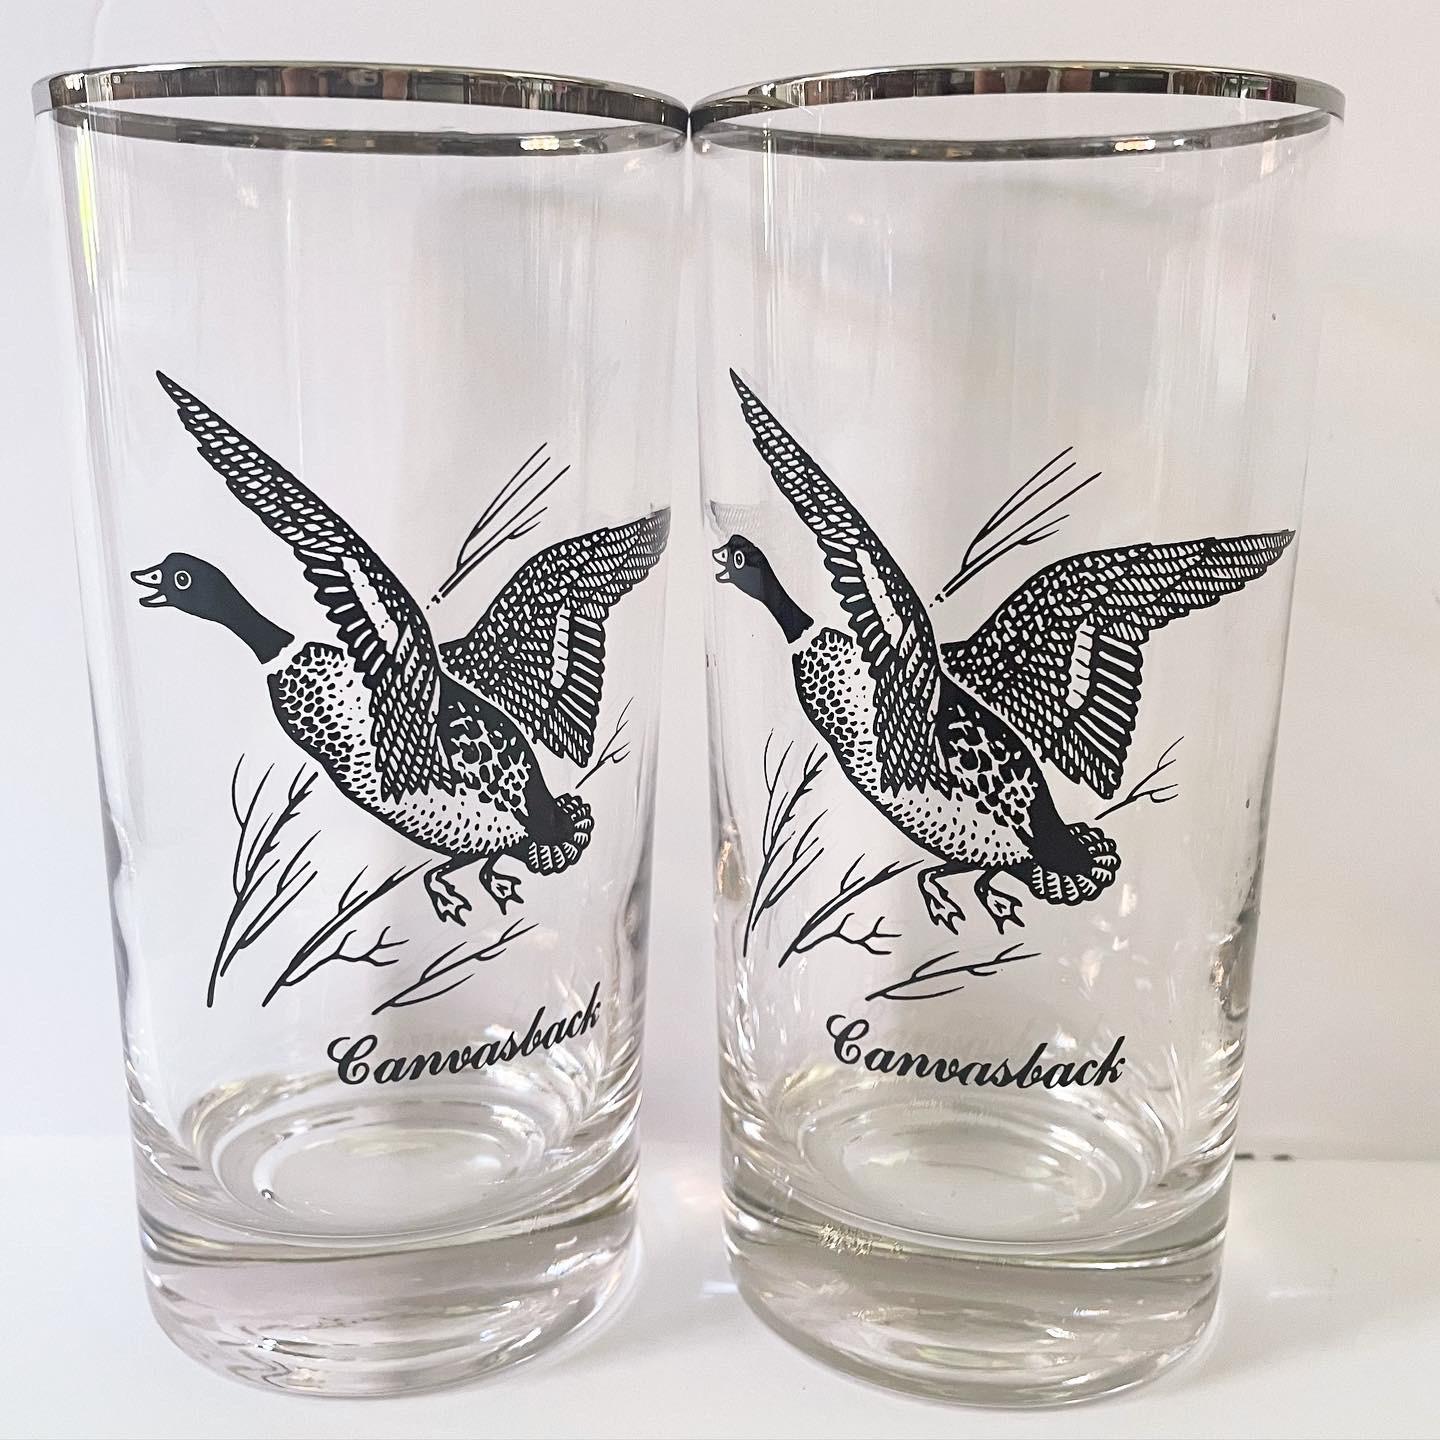 Mid Century Highball Glasses With Ducks and Birds and Silver Rims - Set of 8